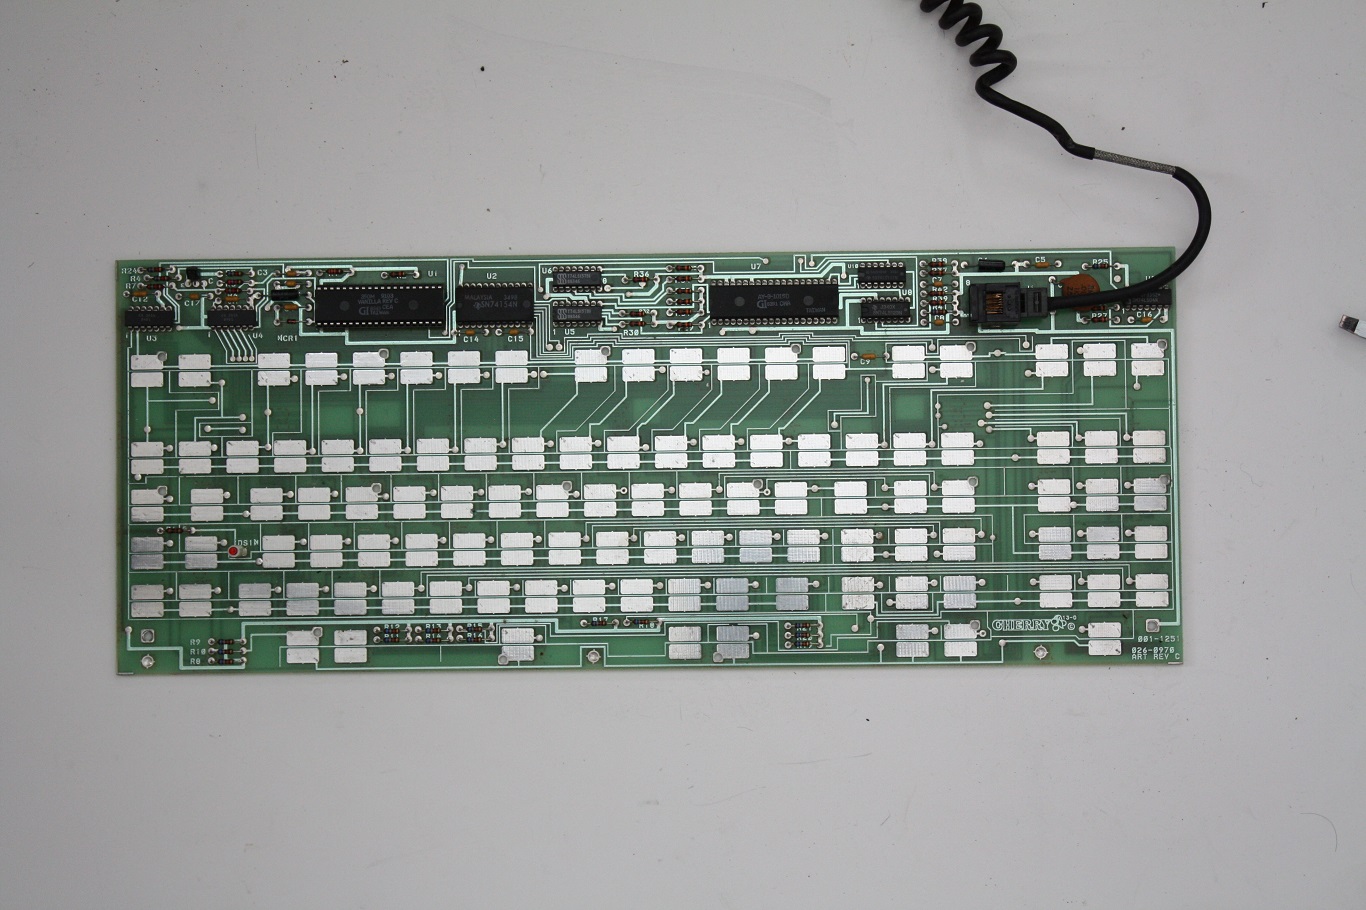 Cherry Terminal Keyboard - front PCB